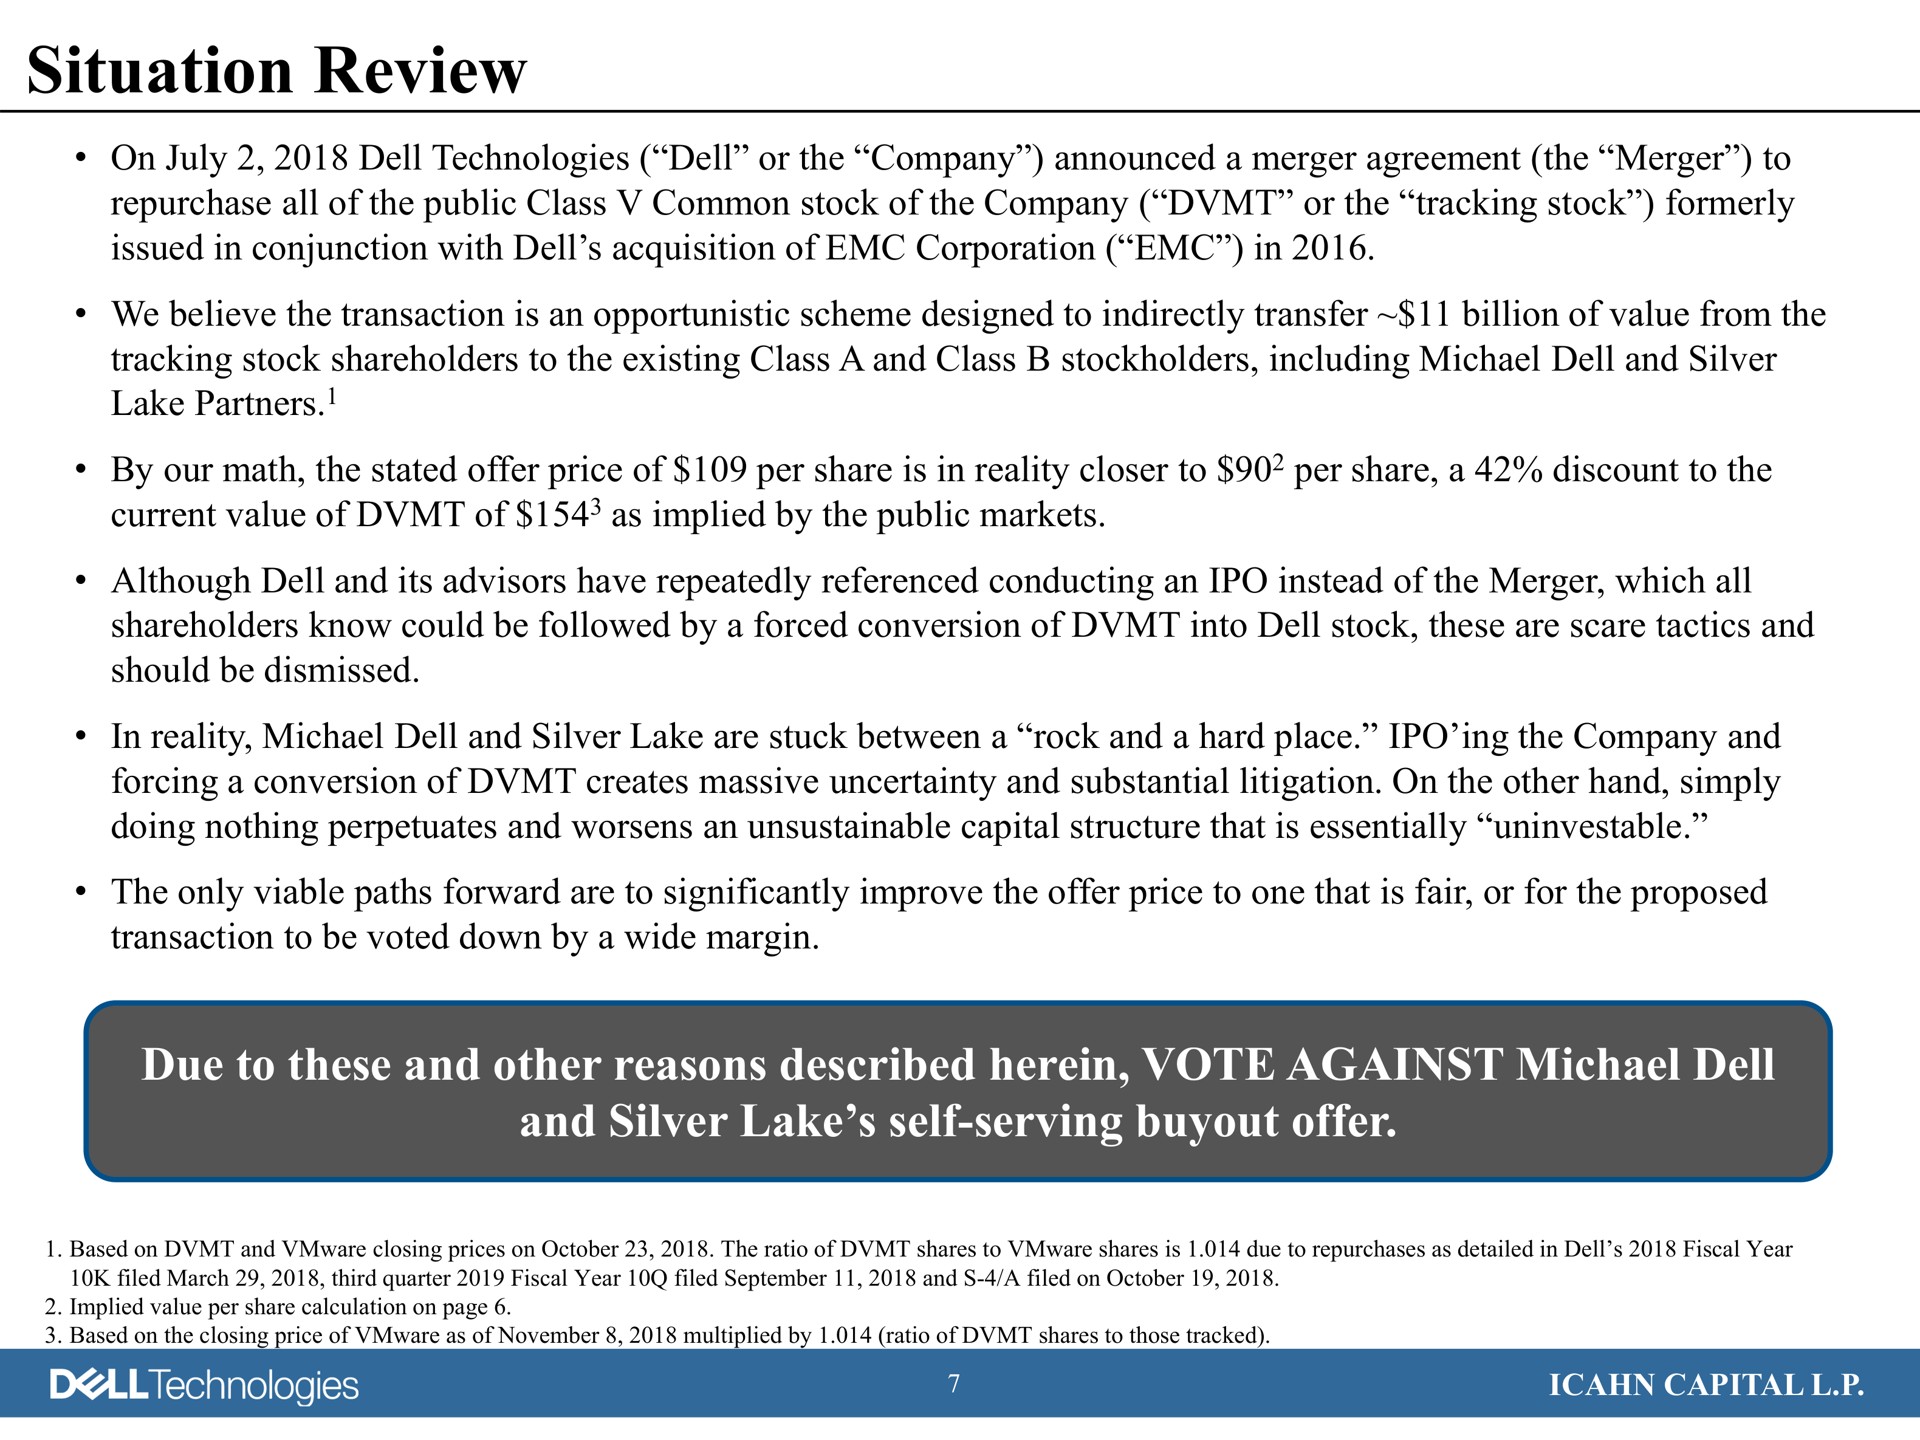 situation review due to these and other reasons described herein vote against dell and silver lake self serving offer technologies i capital | Icahn Enterprises